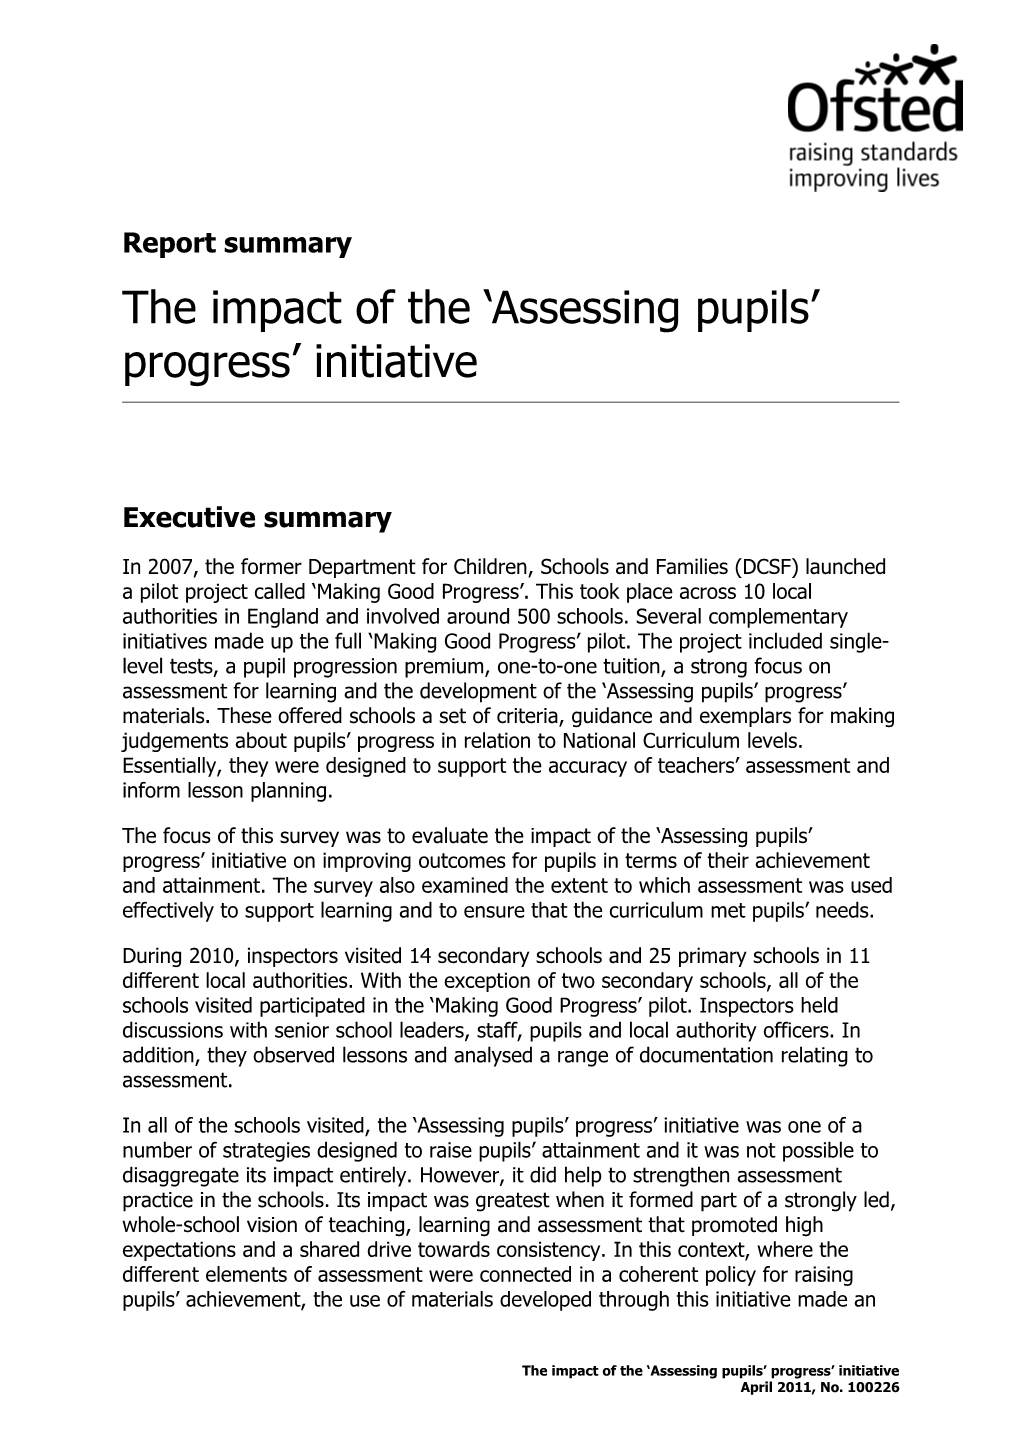 The Impact of the Assessing Pupils Progress Initiative